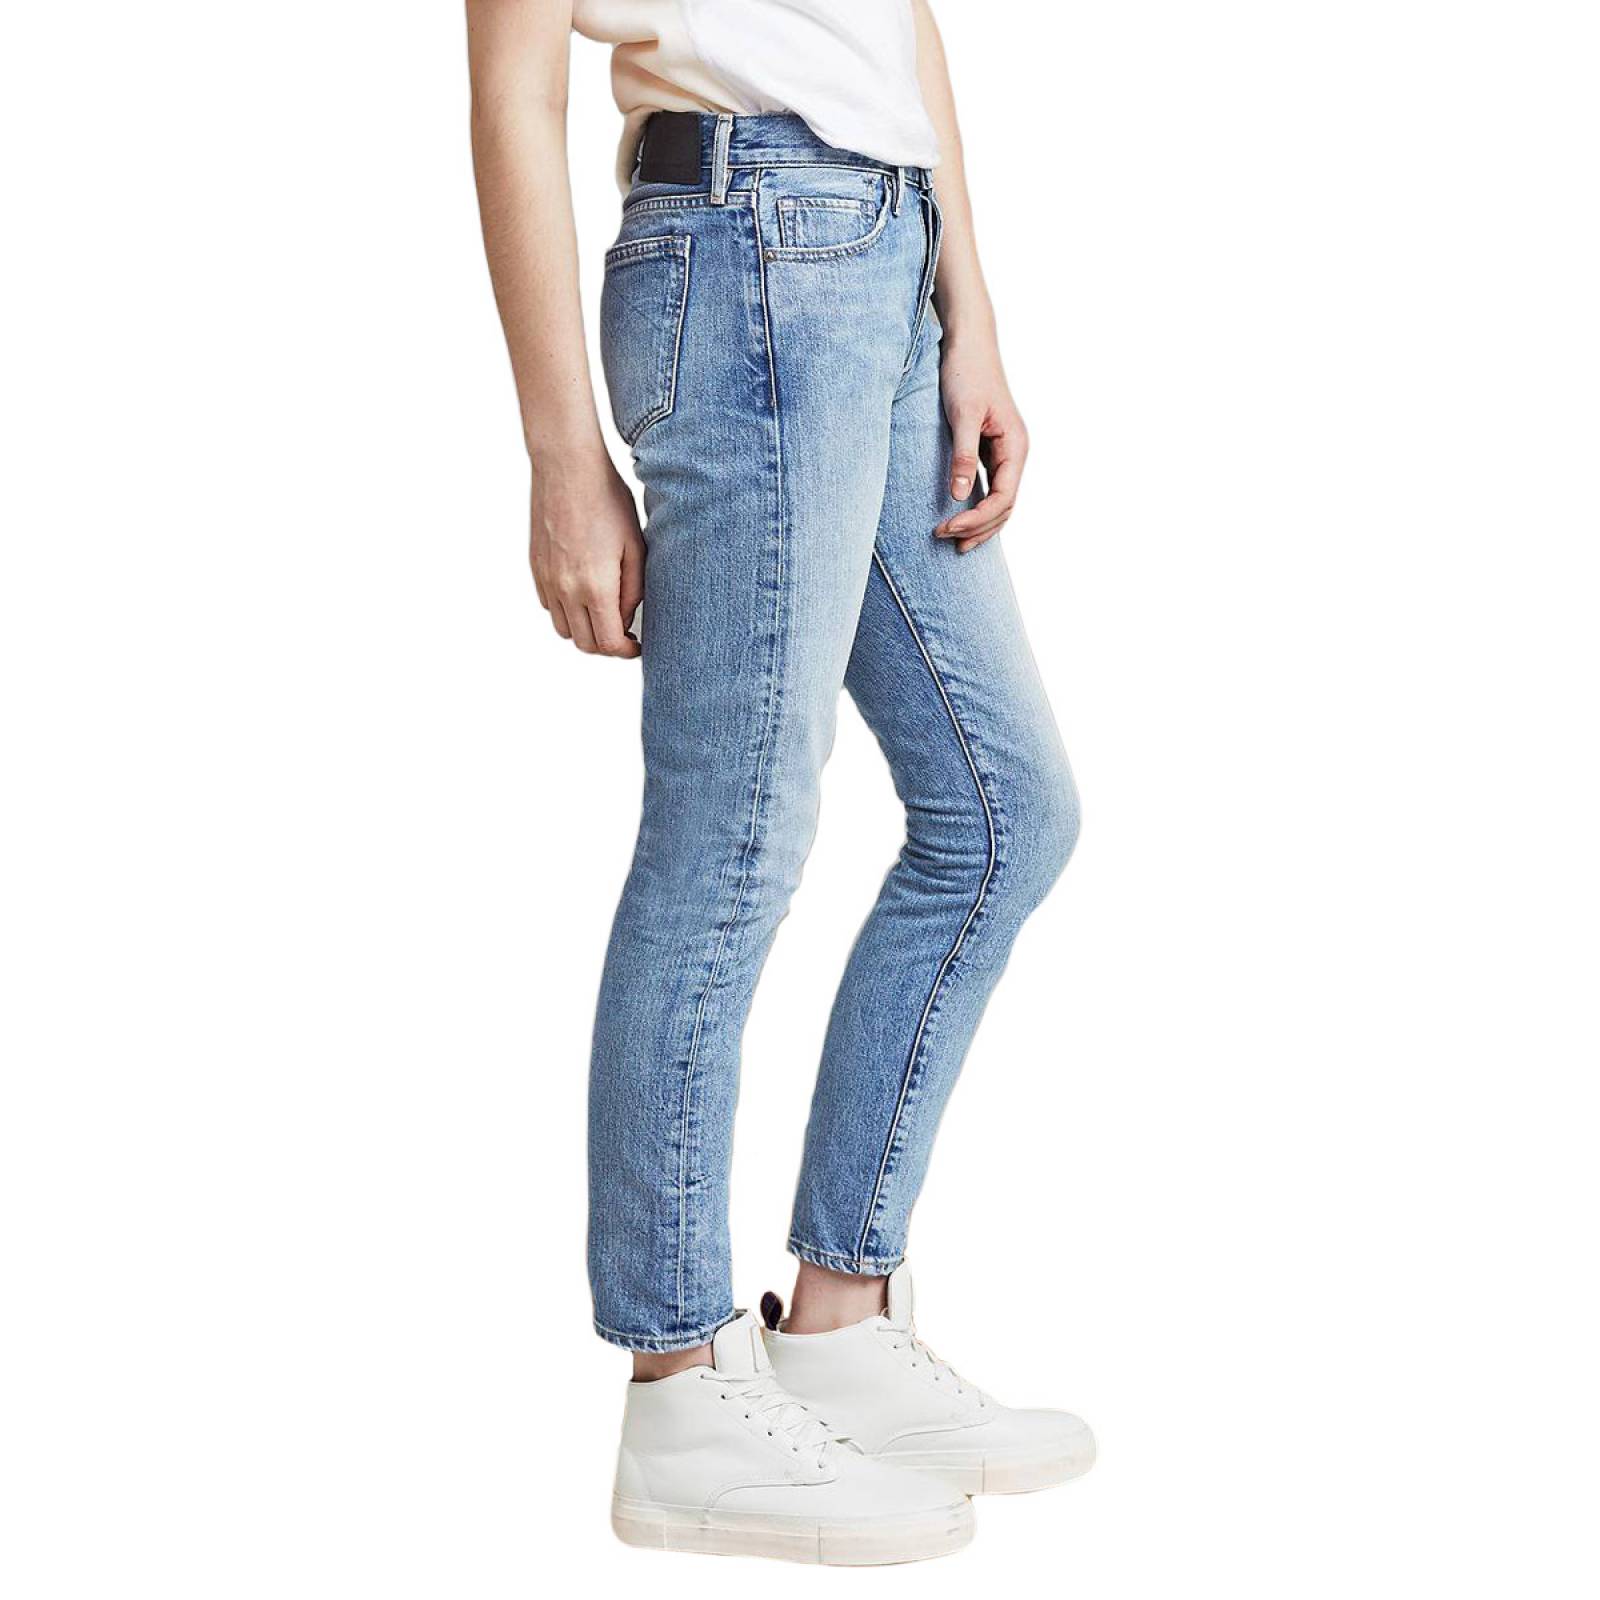 Jeans Twig High Slim II Levis Made & Crafted para Dama